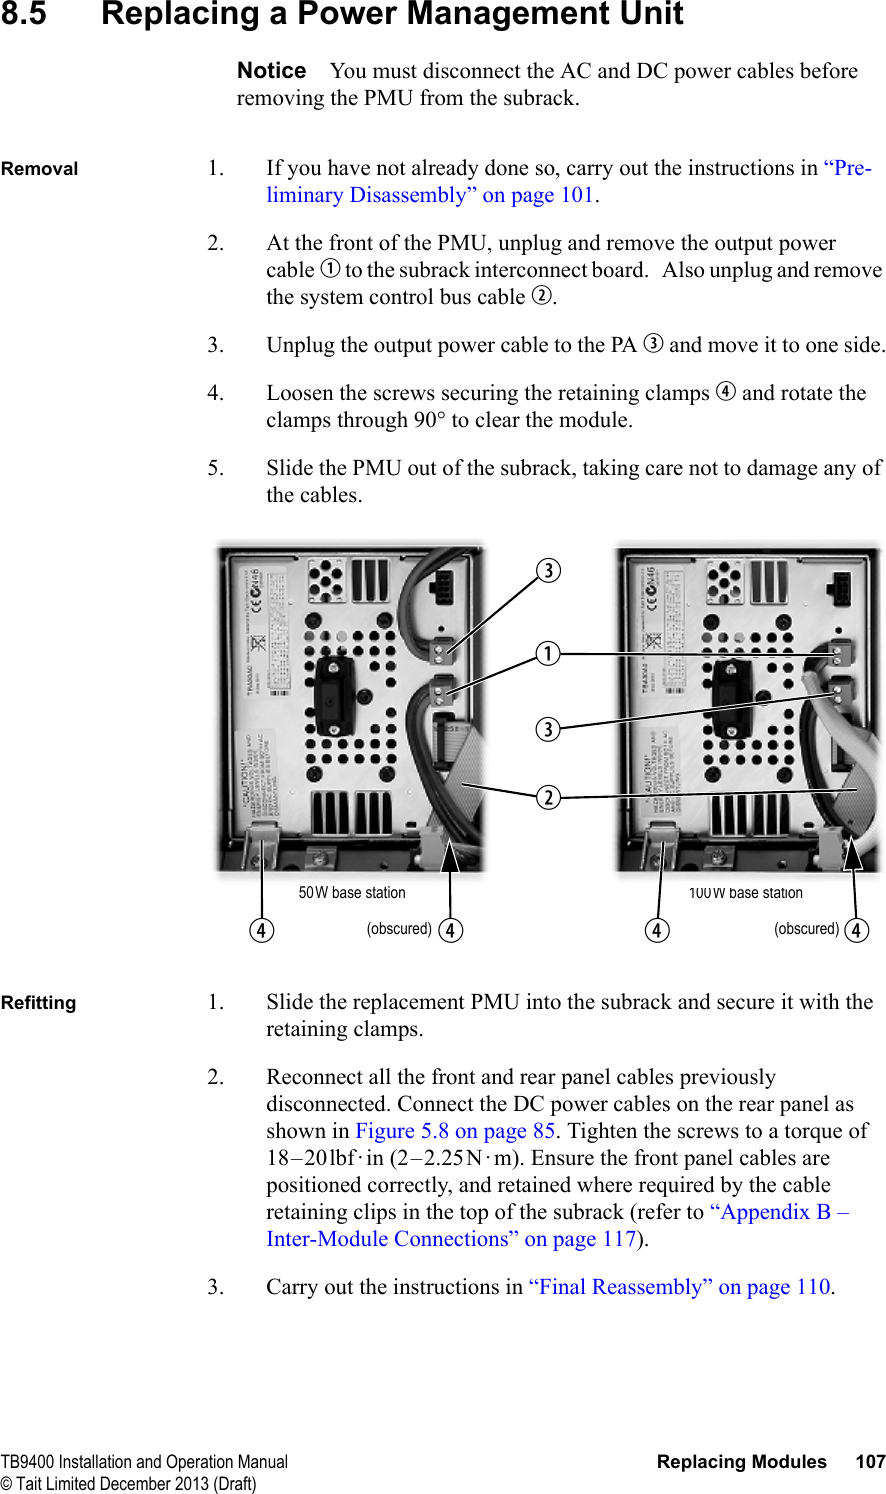  TB9400 Installation and Operation Manual Replacing Modules 107© Tait Limited December 2013 (Draft)8.5 Replacing a Power Management UnitNotice You must disconnect the AC and DC power cables before removing the PMU from the subrack.Removal 1. If you have not already done so, carry out the instructions in “Pre-liminary Disassembly” on page 101.2. At the front of the PMU, unplug and remove the output power cable b to the subrack interconnect board.   Also unplug and remove the system control bus cable c.3. Unplug the output power cable to the PA d and move it to one side.4. Loosen the screws securing the retaining clamps e and rotate the clamps through 90° to clear the module.5. Slide the PMU out of the subrack, taking care not to damage any of the cables.Refitting 1. Slide the replacement PMU into the subrack and secure it with the retaining clamps.2. Reconnect all the front and rear panel cables previously disconnected. Connect the DC power cables on the rear panel as shown in Figure 5.8 on page 85. Tighten the screws to a torque of 18–20lbf·in (2–2.25N·m). Ensure the front panel cables are positioned correctly, and retained where required by the cable retaining clips in the top of the subrack (refer to “Appendix B – Inter-Module Connections” on page 117).3. Carry out the instructions in “Final Reassembly” on page 110.100W base station(obscured)50W base stationbcddee e(obscured)e